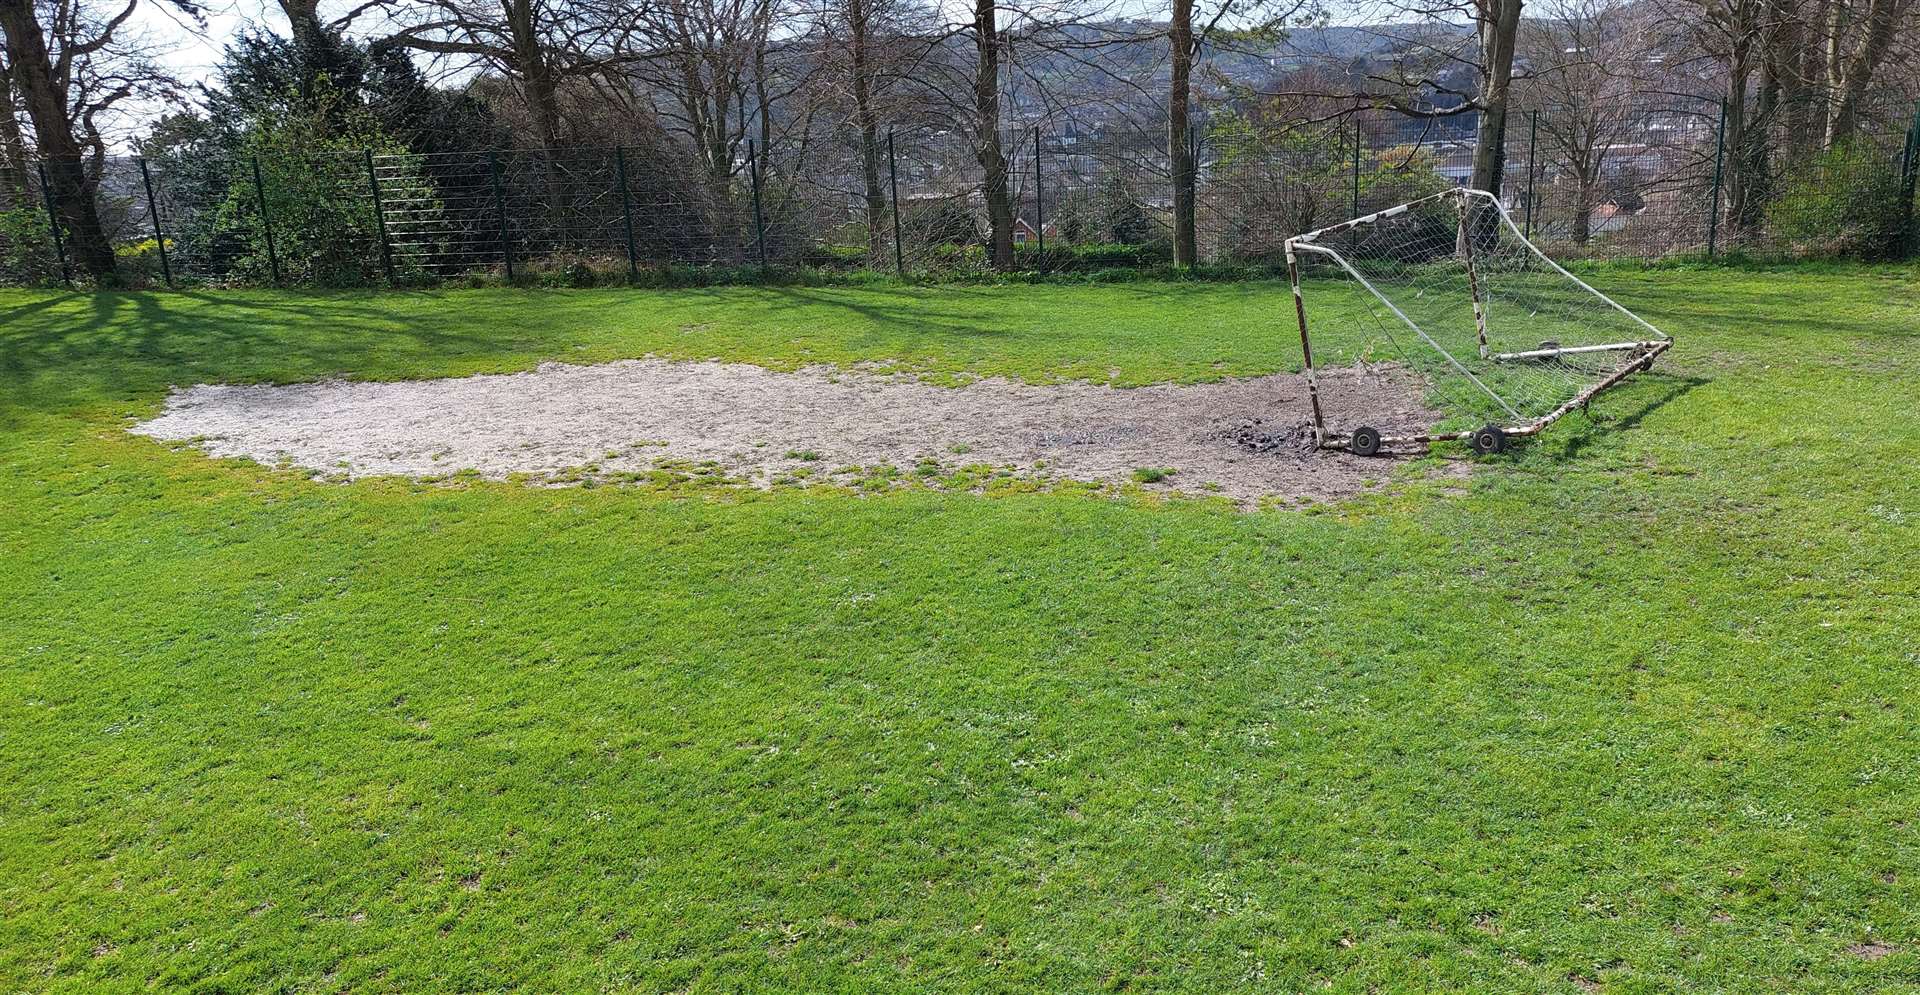 The football pitch opposite the courts is also in a poor state